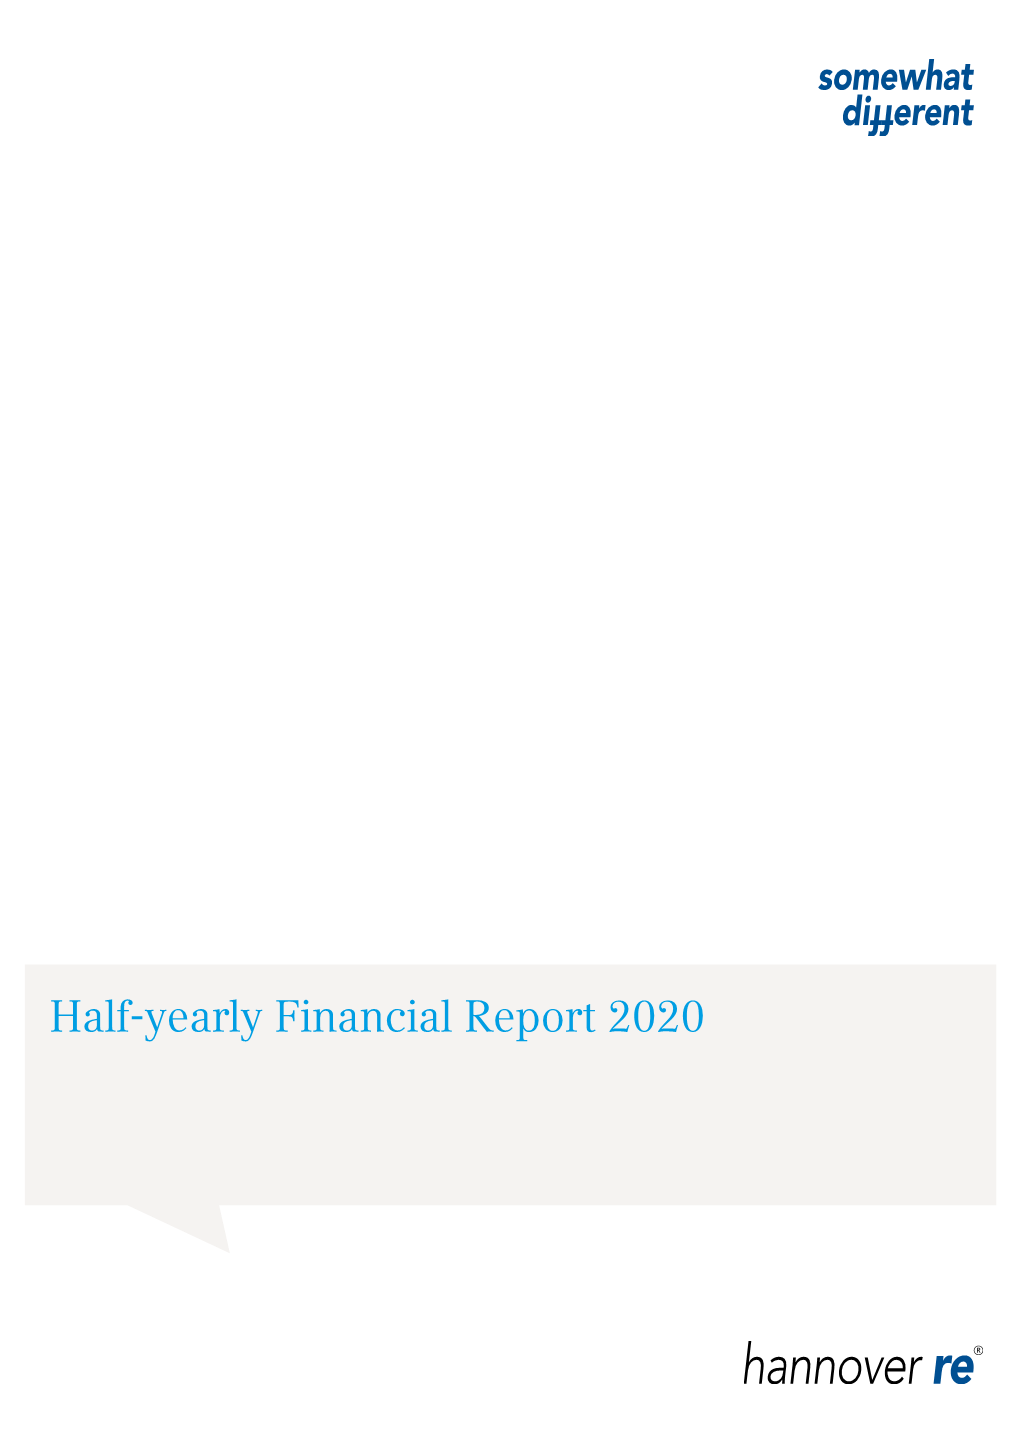 Half-Yearly Financial Report 2020 Key Figures